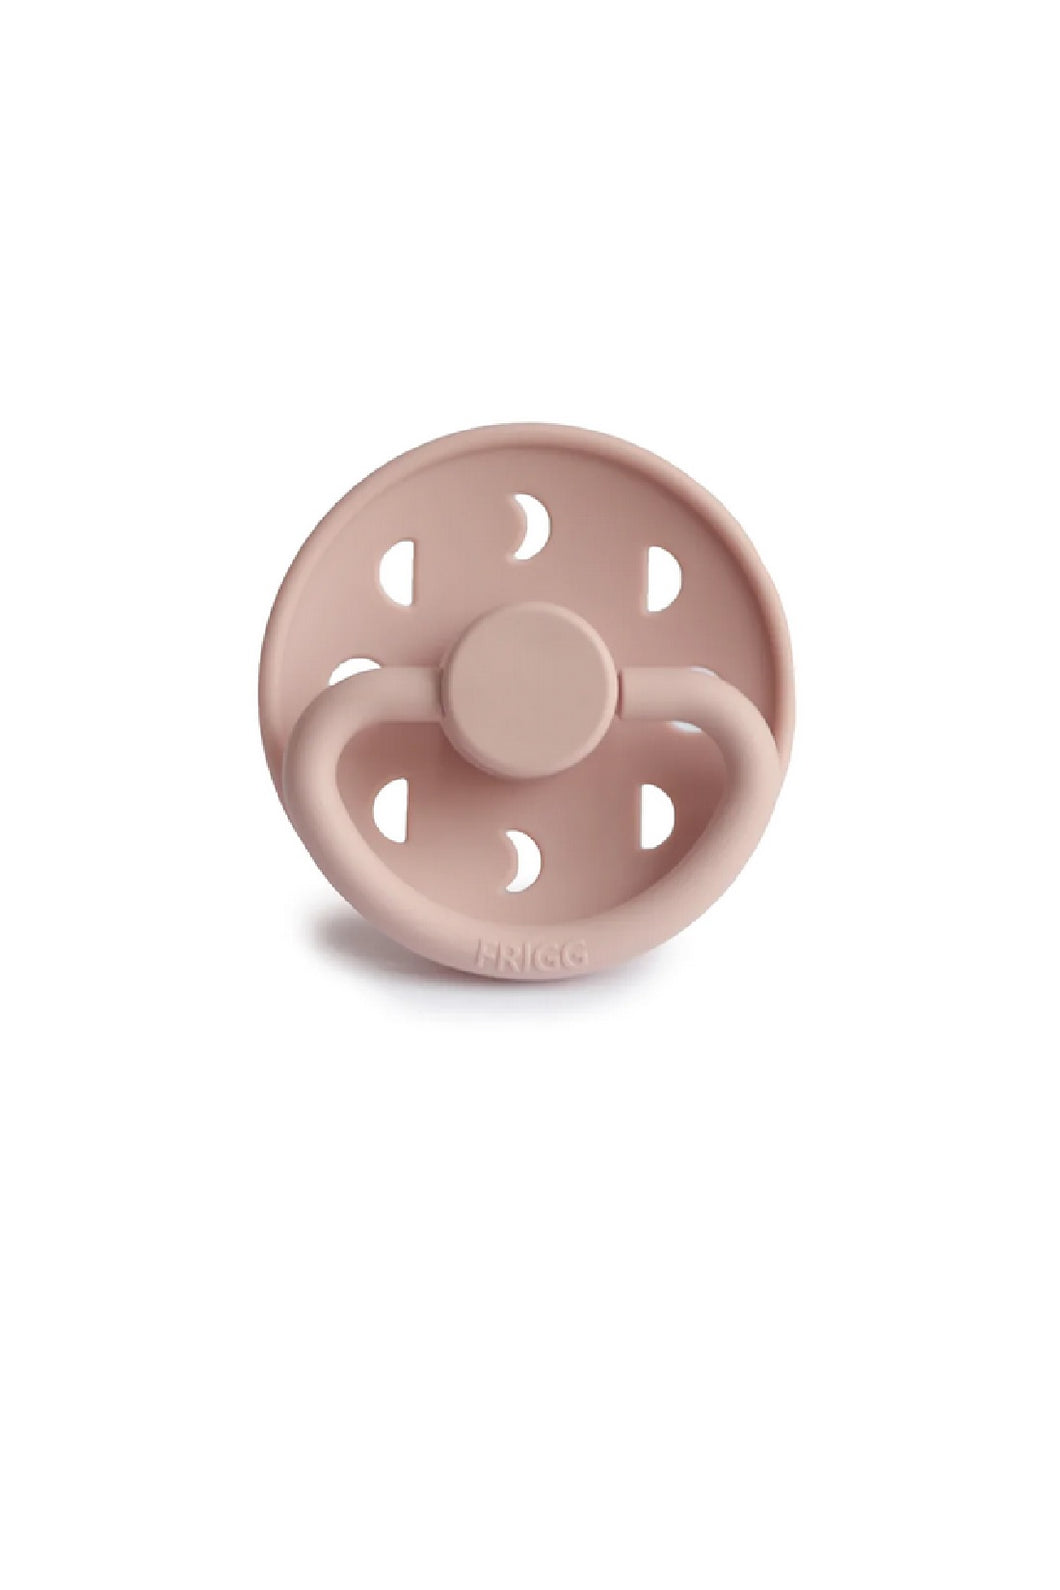 Frigg Moon Silicone Pacifier - Blush